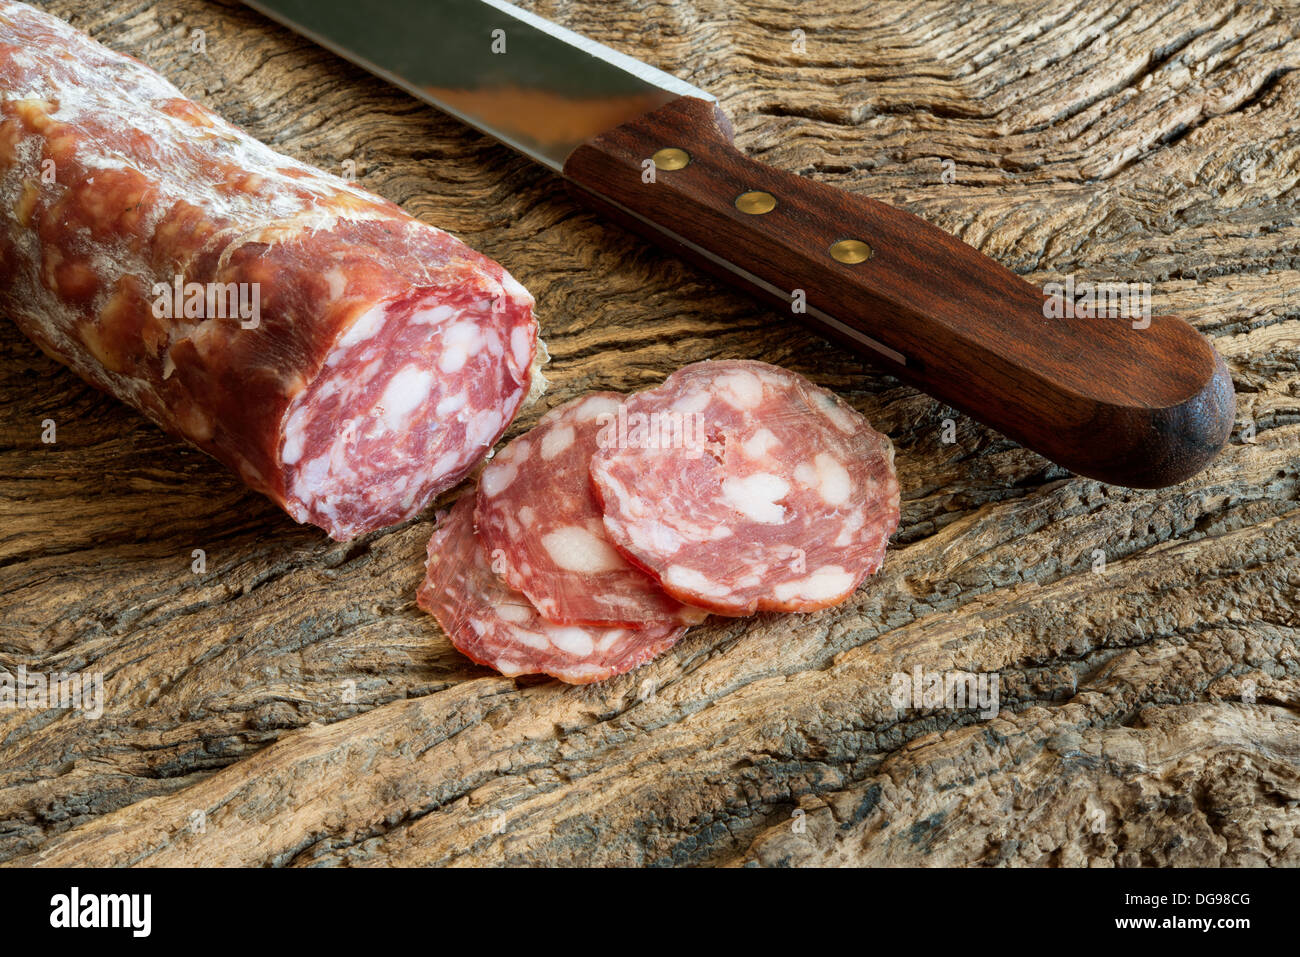 genuine salami sliced on ancient wooden table Stock Photo